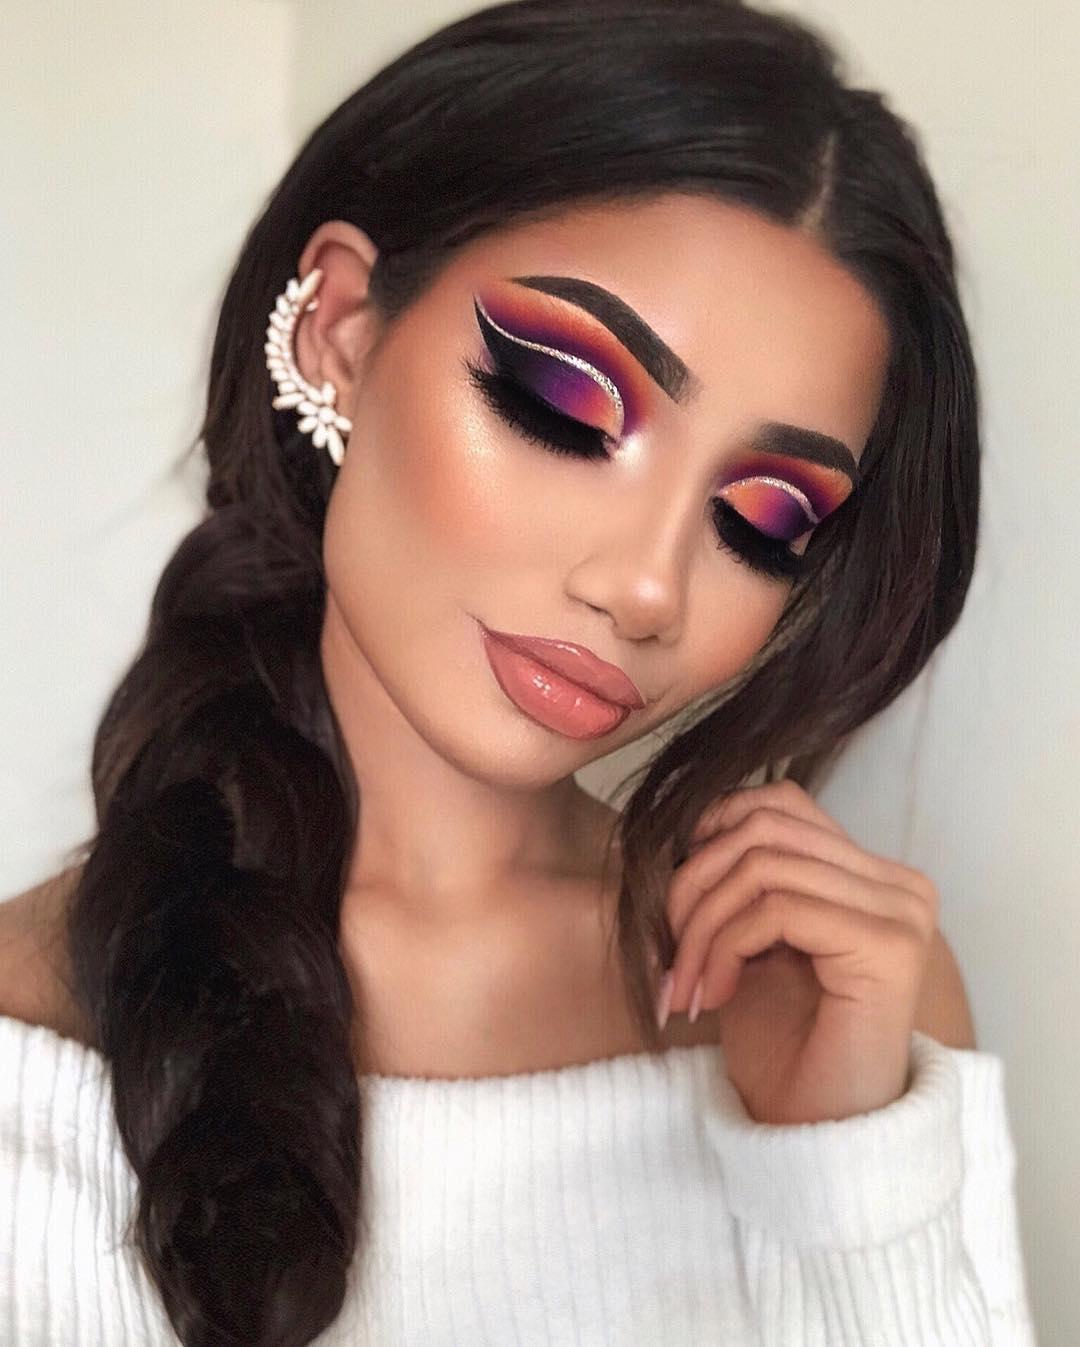 Makeup Ideas for Date Night : SLAY 
Tag someone who would love this 
Follow @fashionmakeupglam & tag for a fea...: 